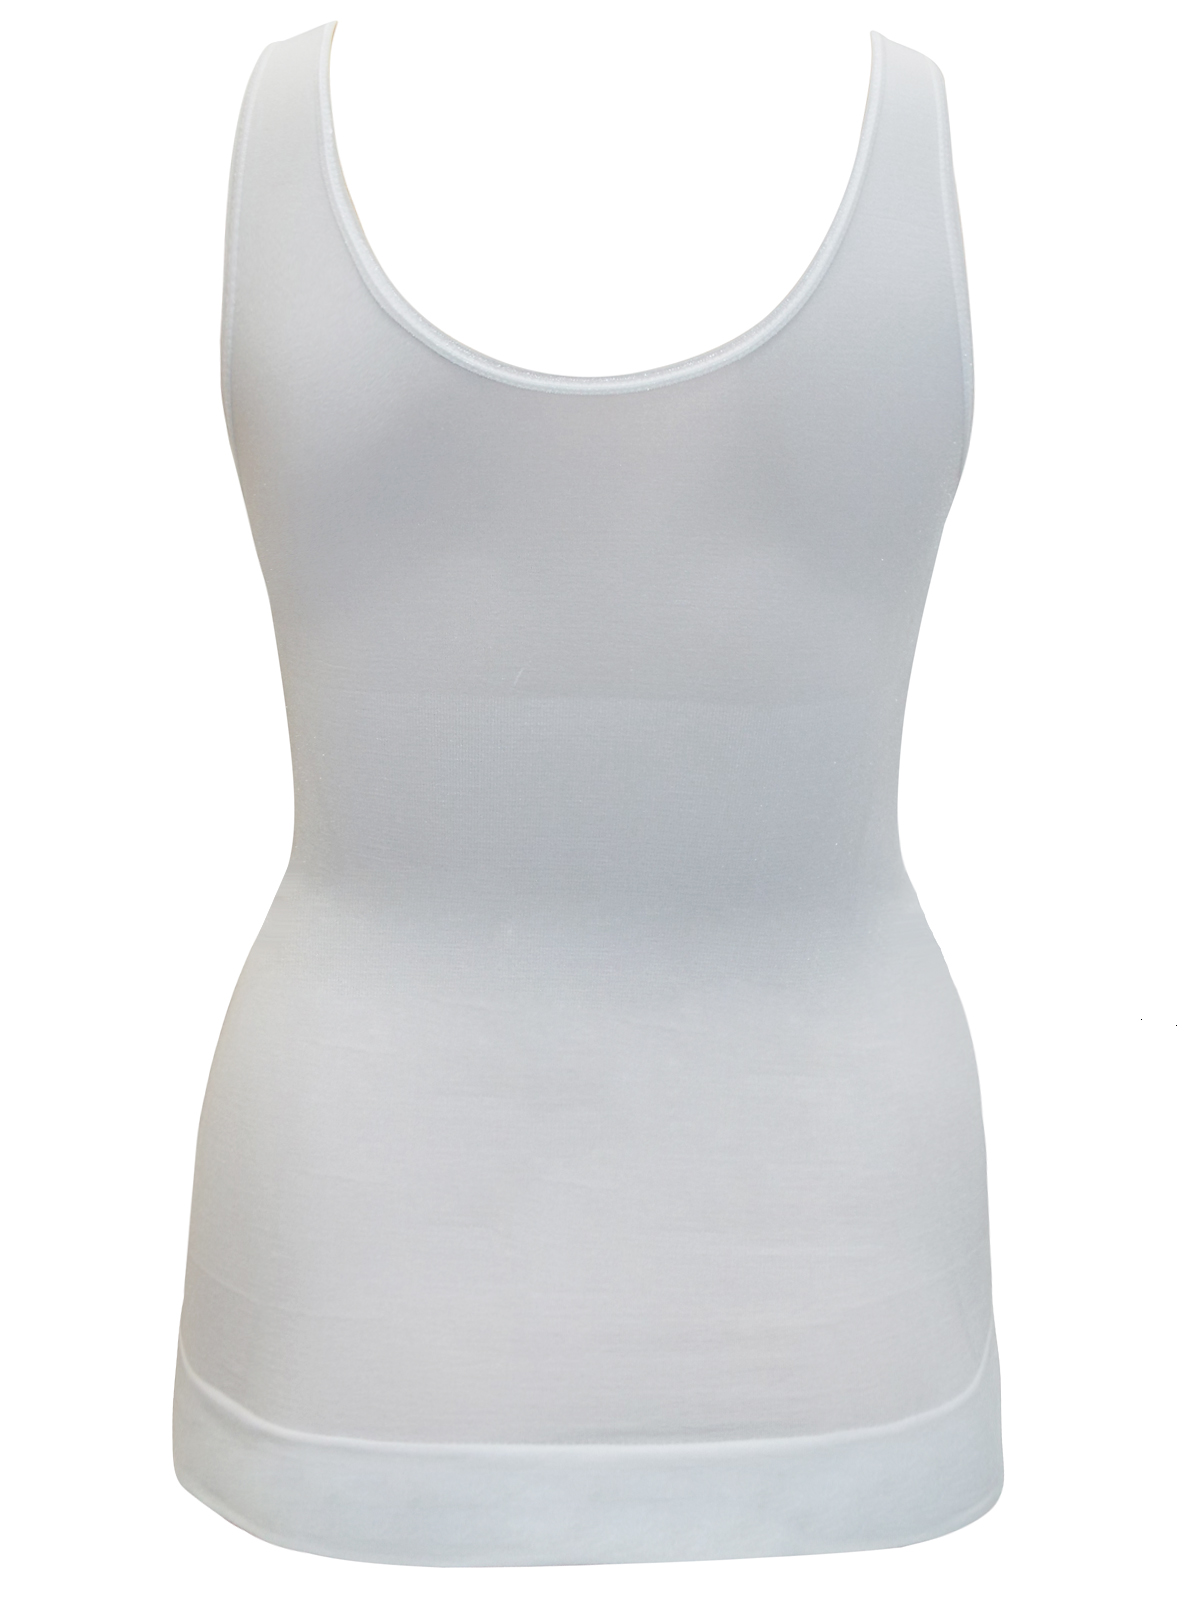 MS Mode - - MS Mode WHITE Body Shaping Vest Top - Size 14/16 to 26/28 ...